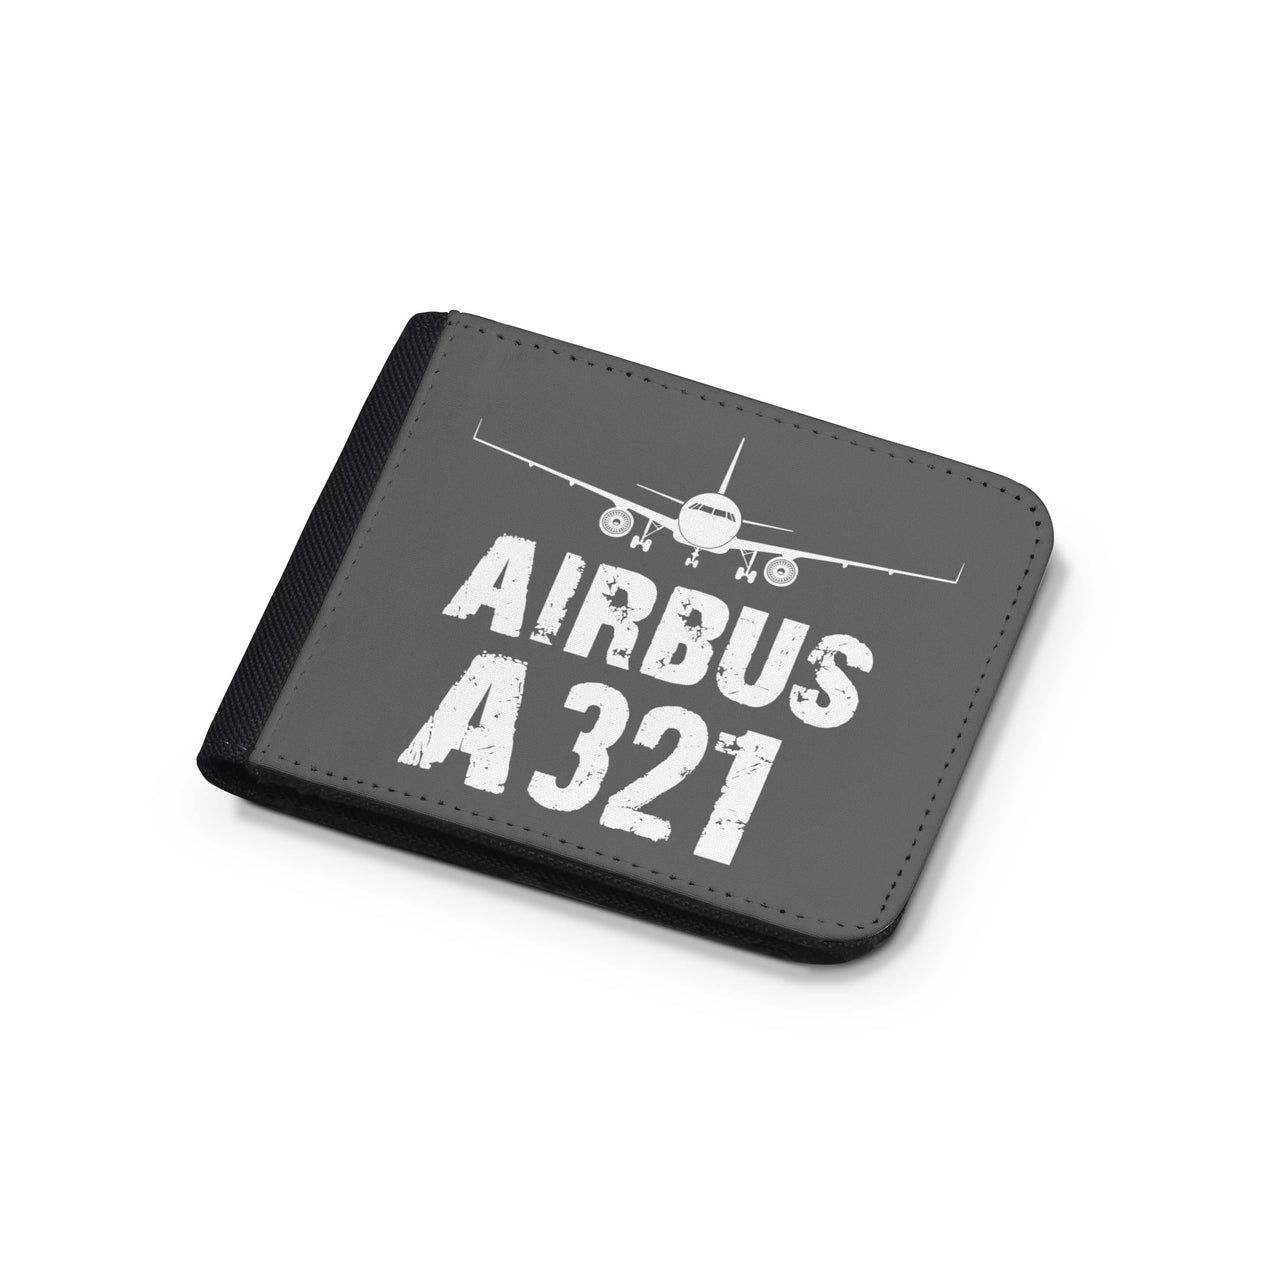 Airbus A321 & Plane Designed Wallets